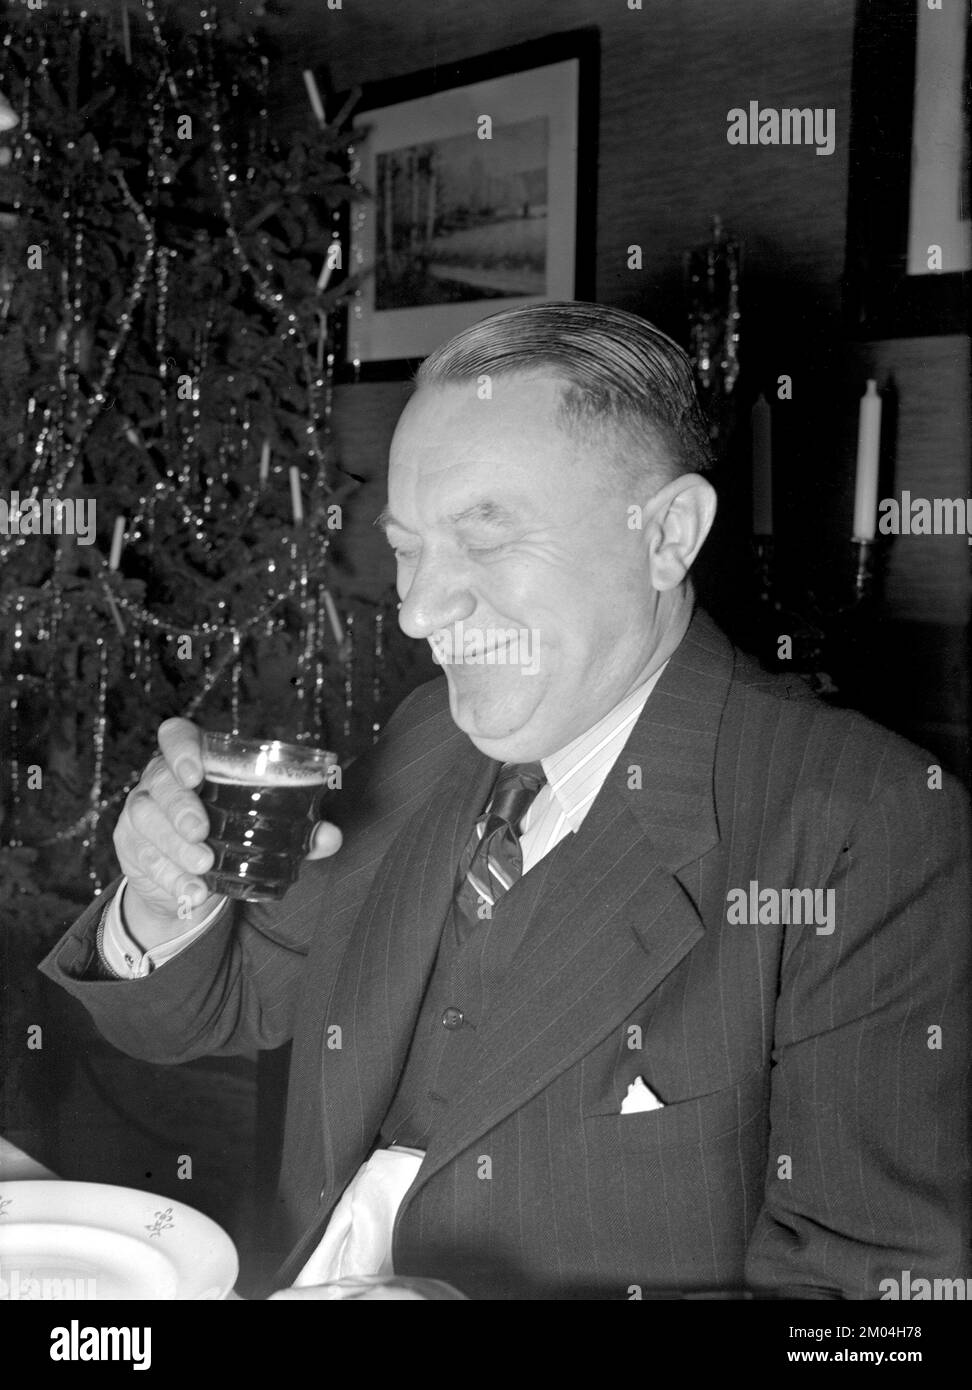 At christmas in the 1940s. A man is having christmas dinner and to this he also looks as if he enjoys the typical traditional christmas drink. Sweden december 1940 Kristoffersson 42-8 Stock Photo